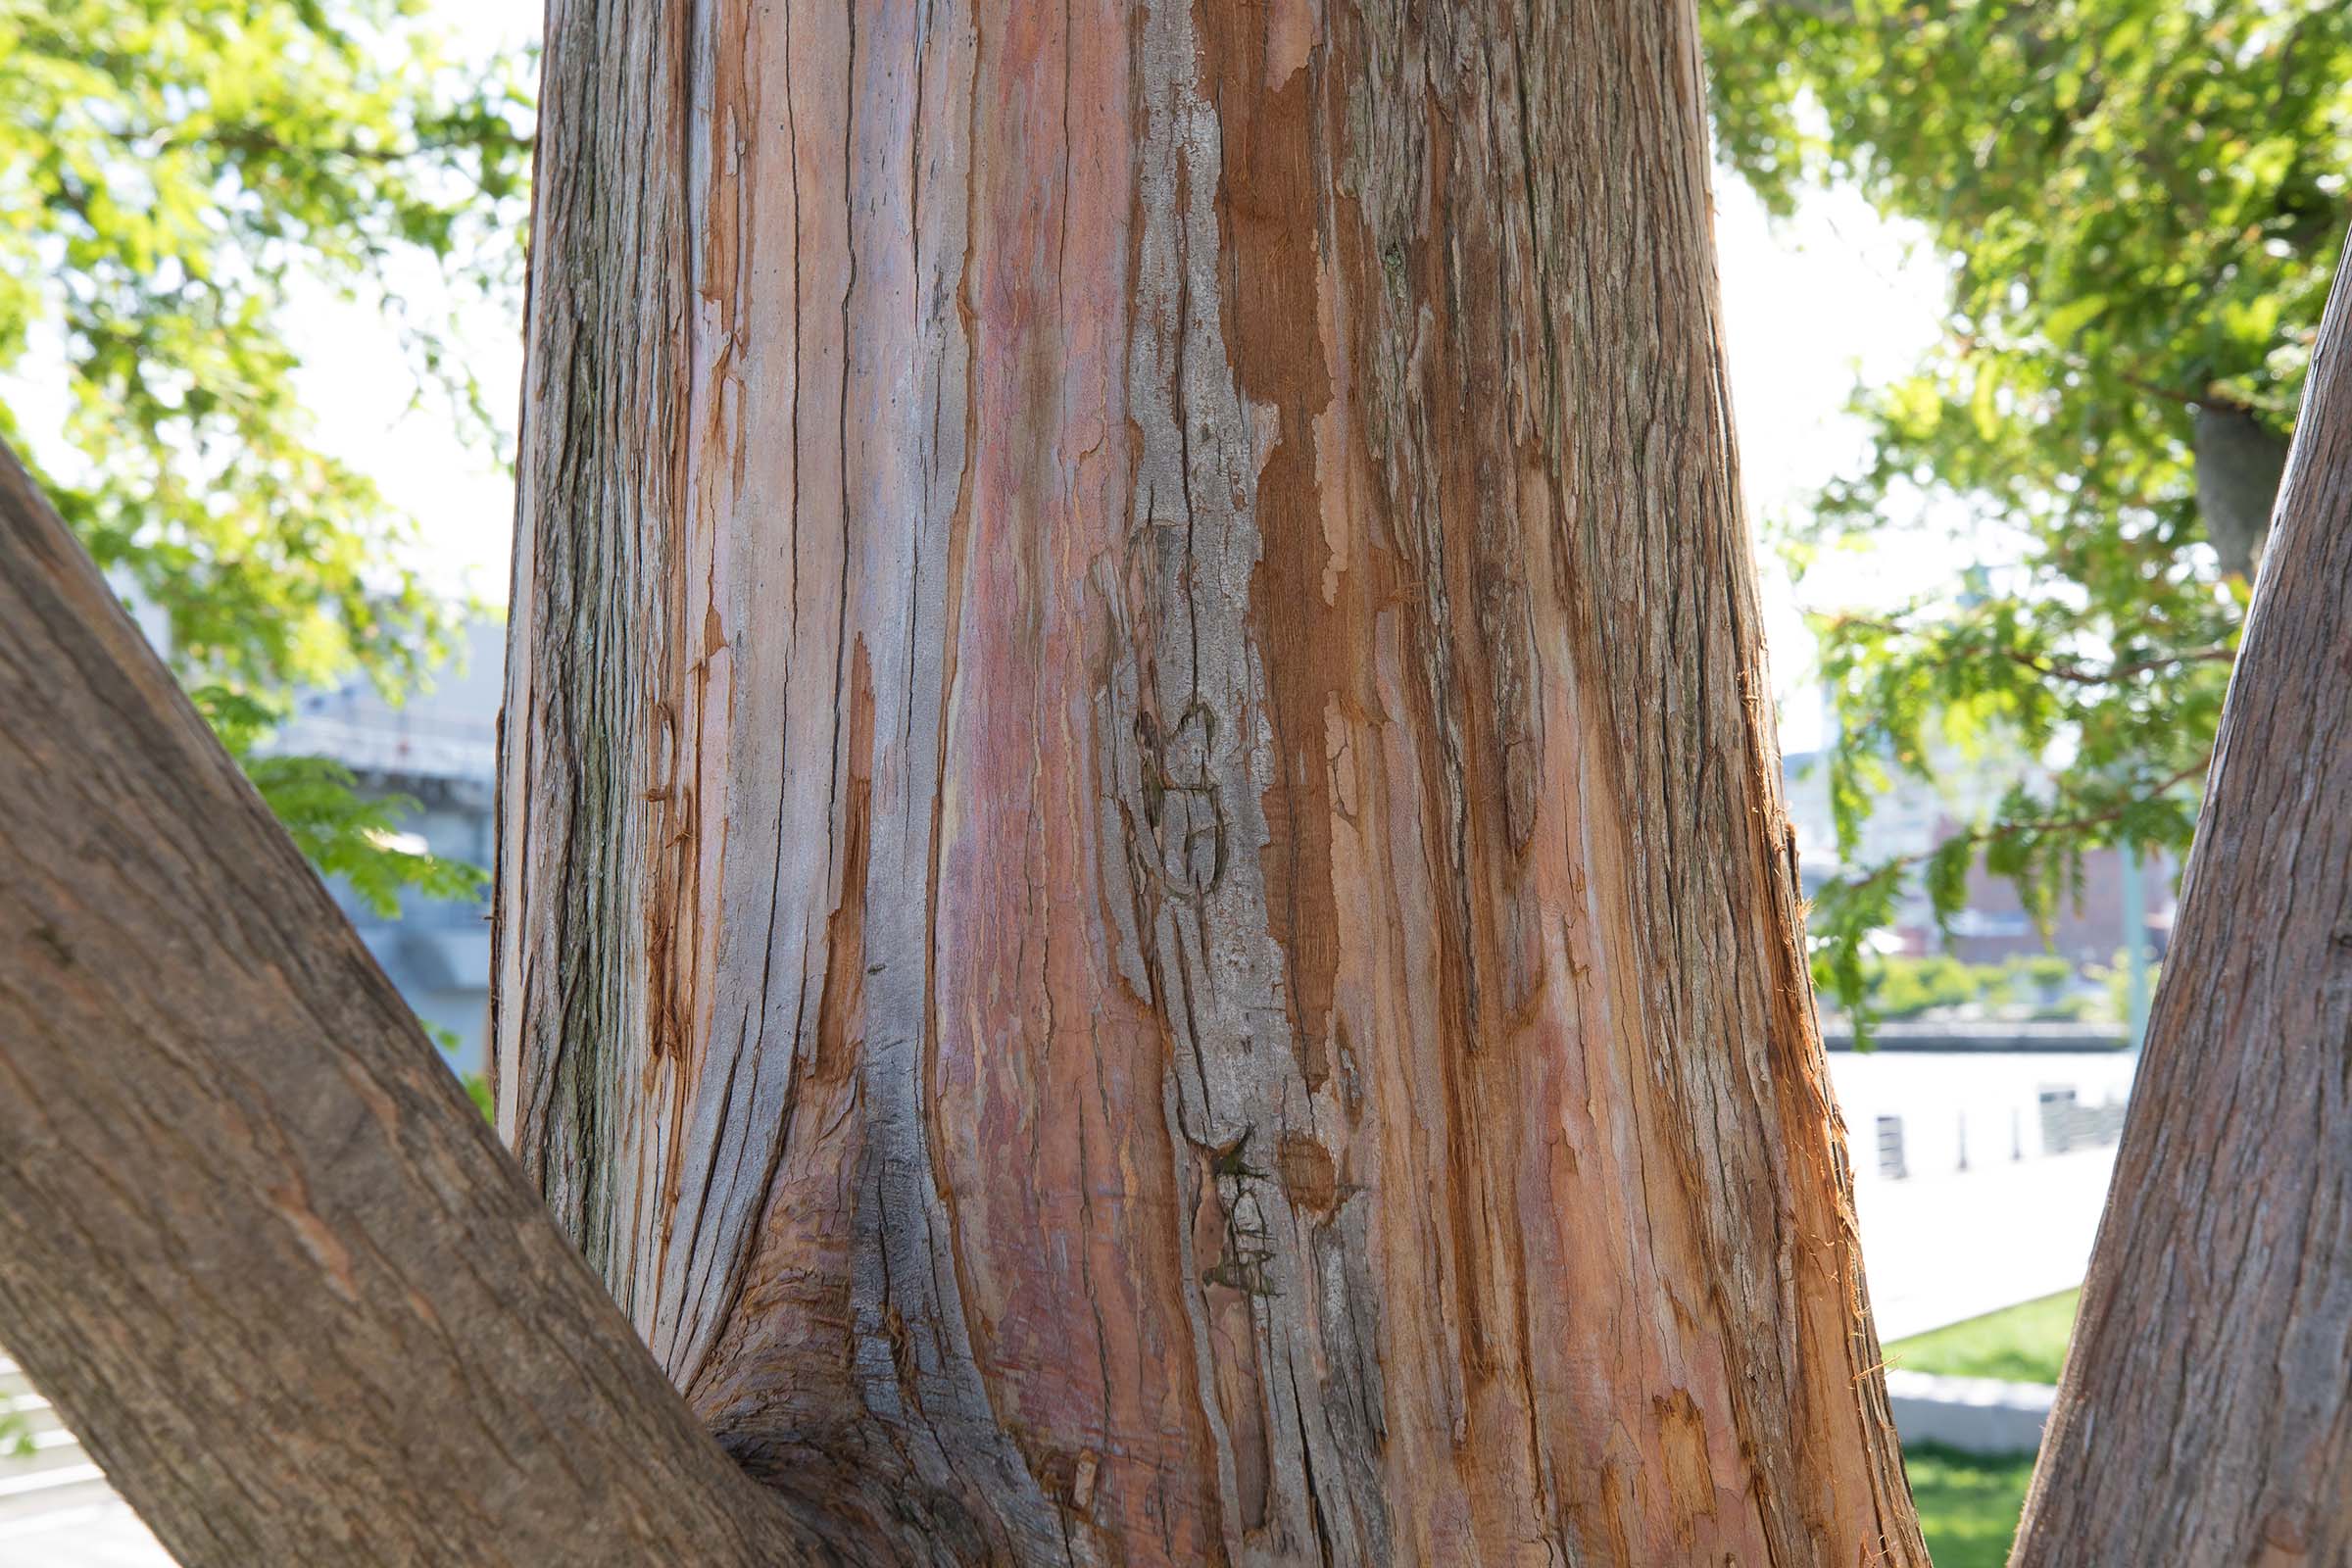 The dawn redwood tree trunk has red and auburn colors under the gray bark